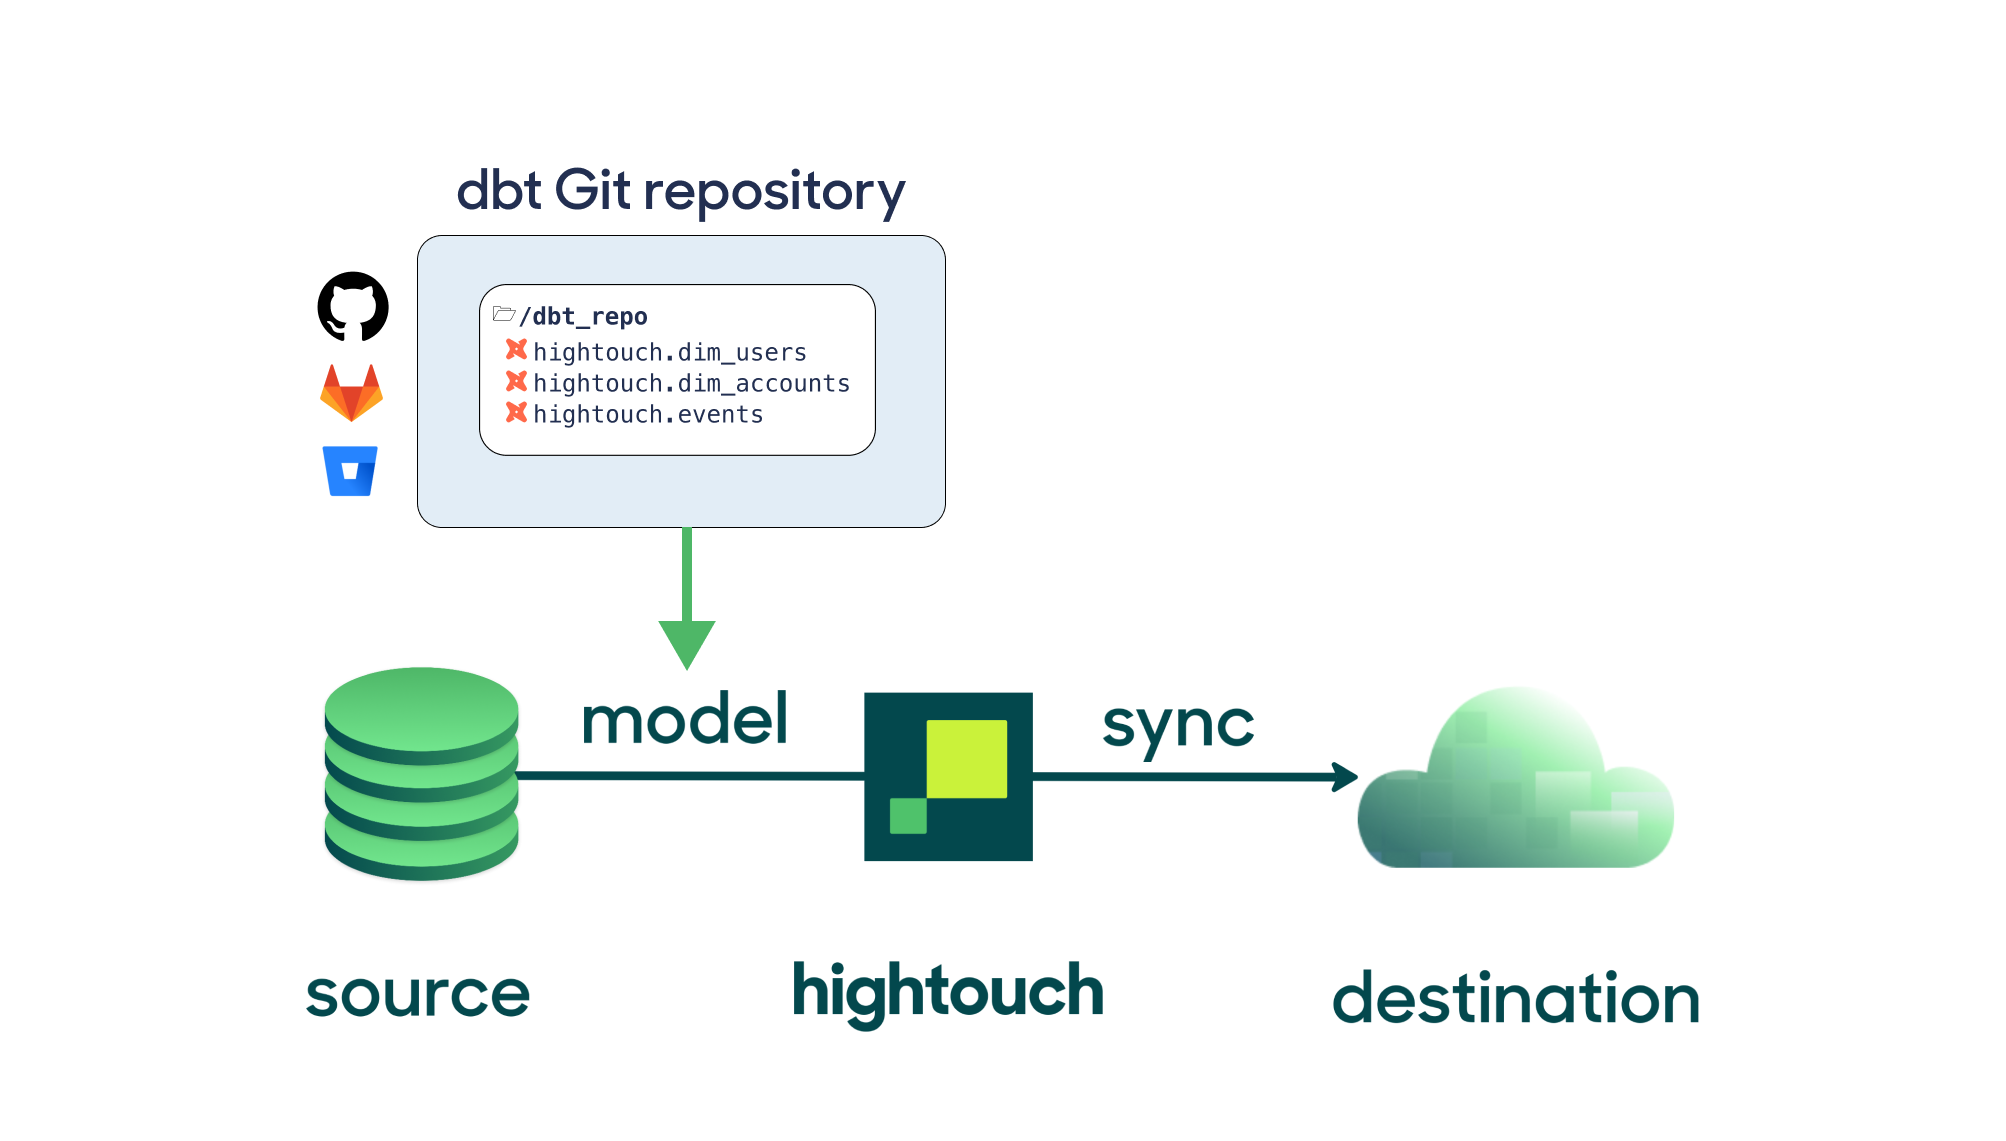 dbt-based models in Hightouch